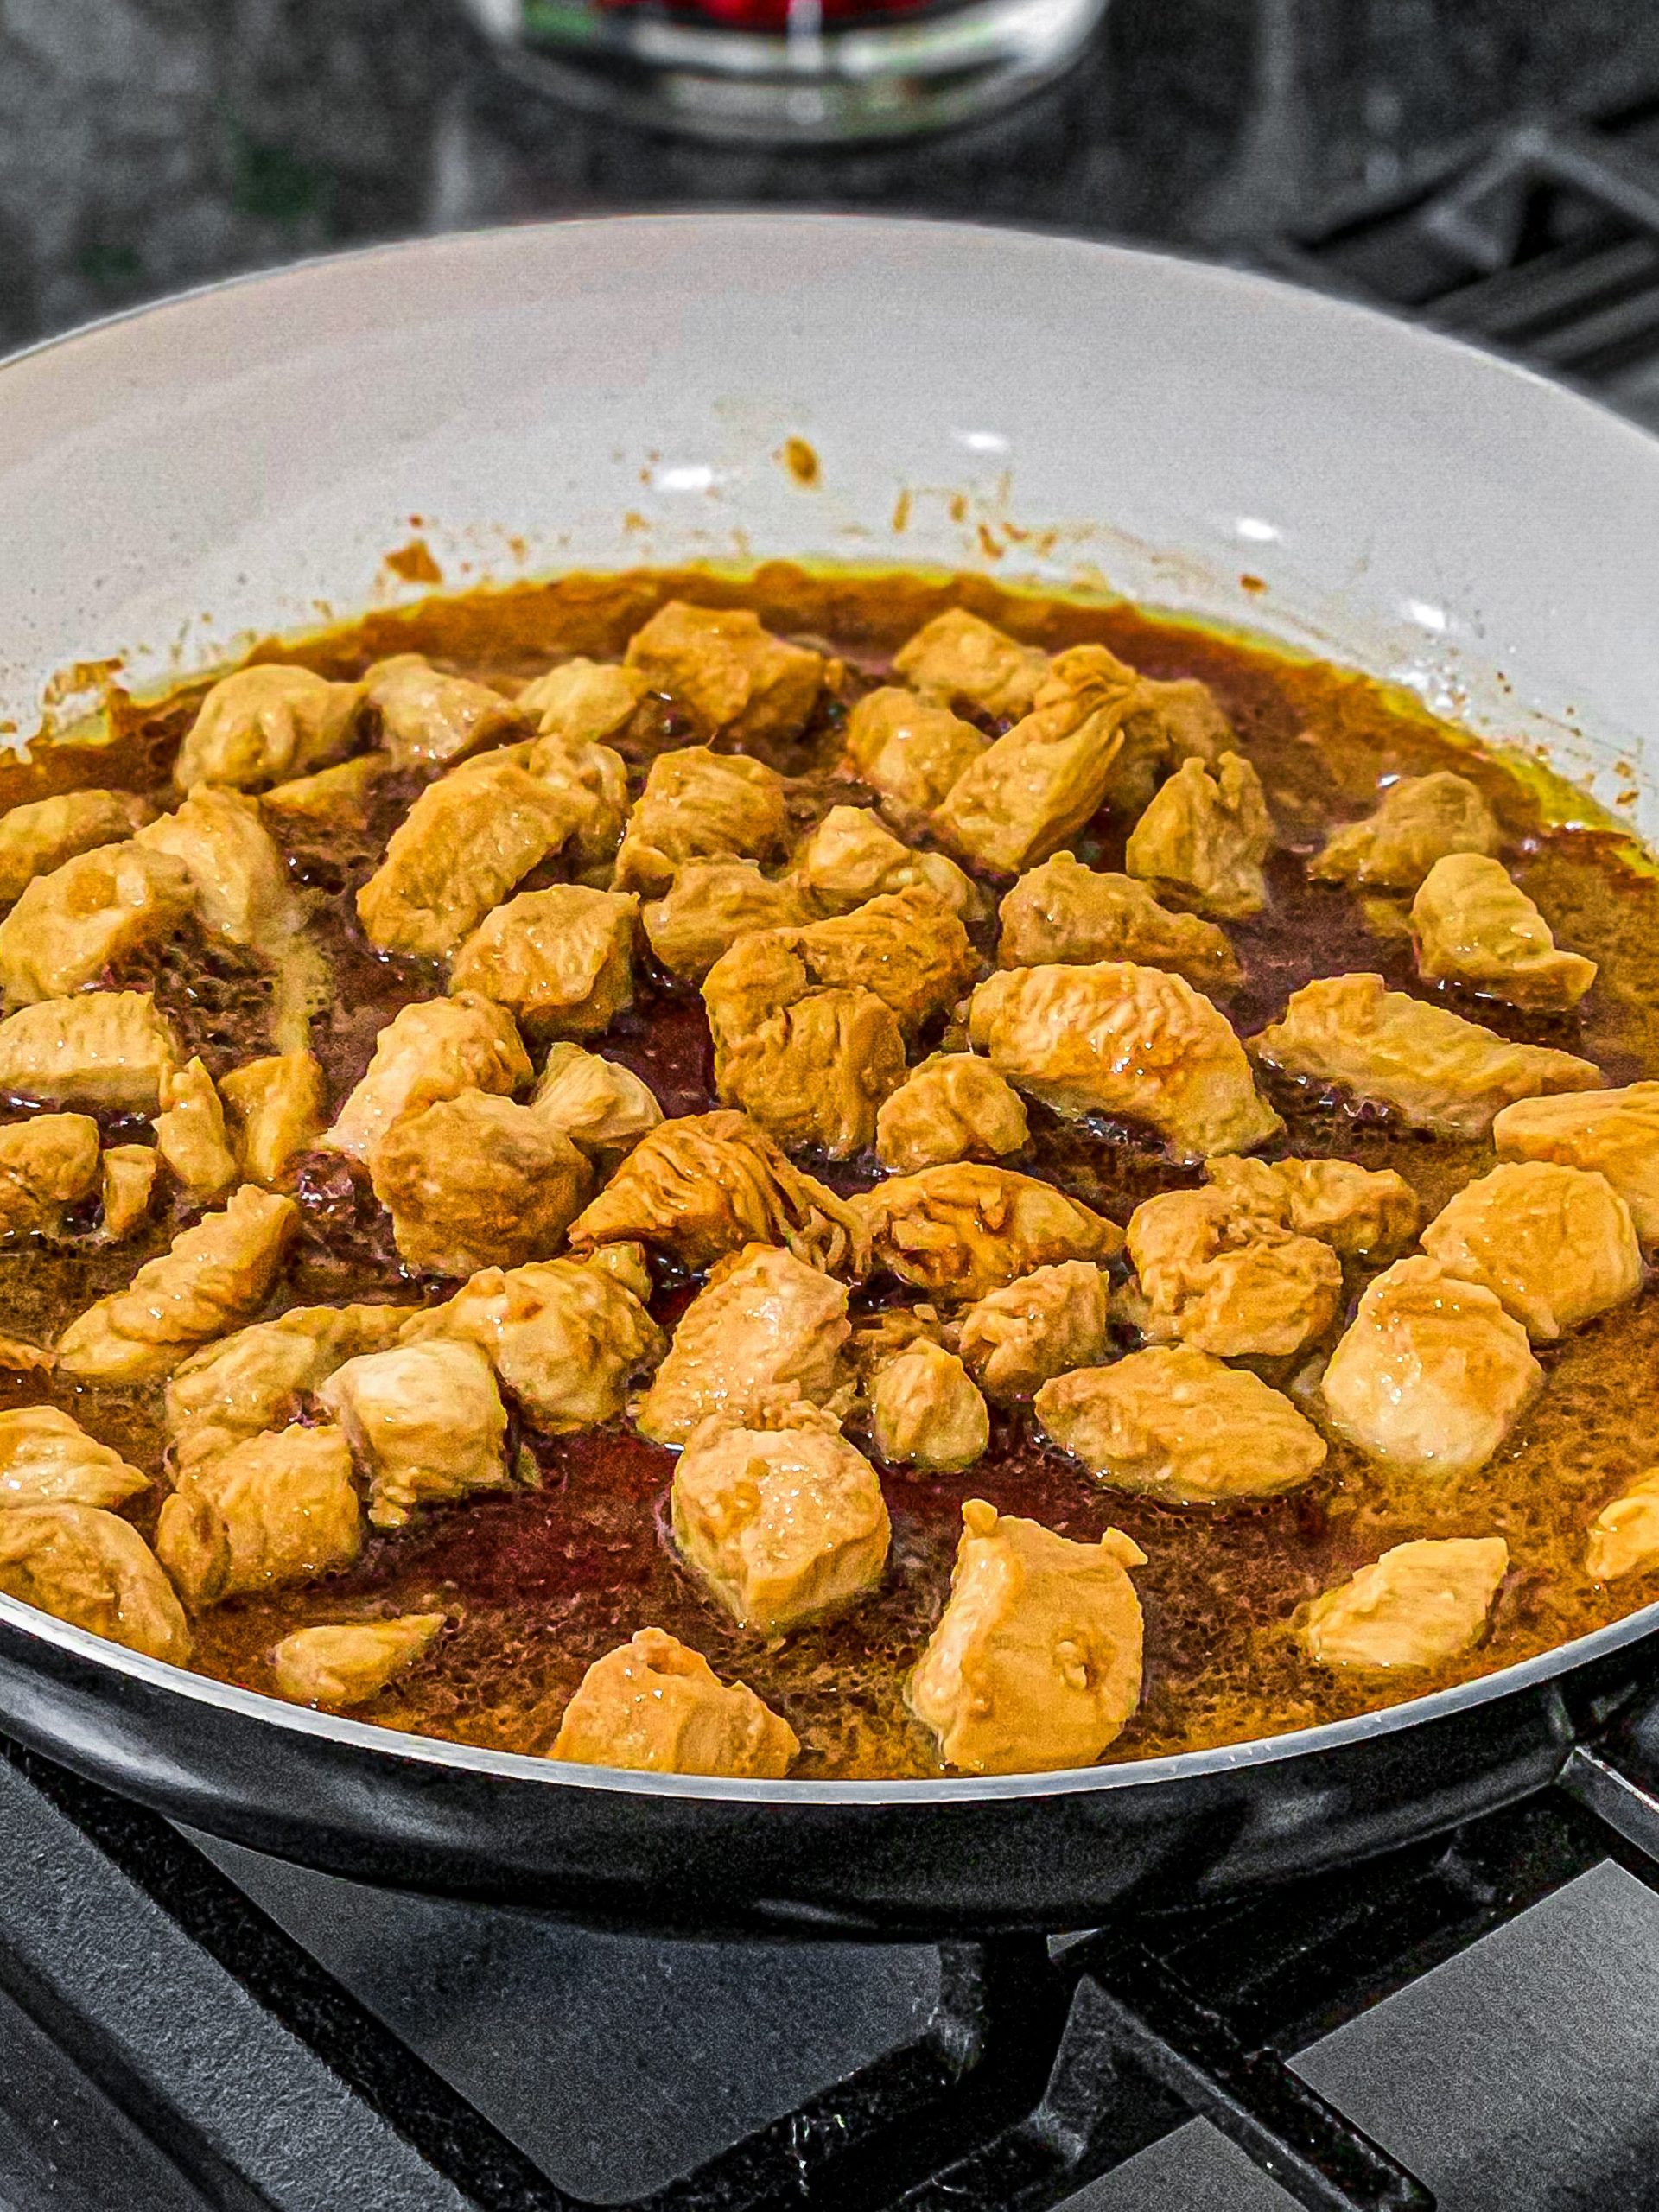 Add the marinated chicken with the sauce and cook for 3 minutes.